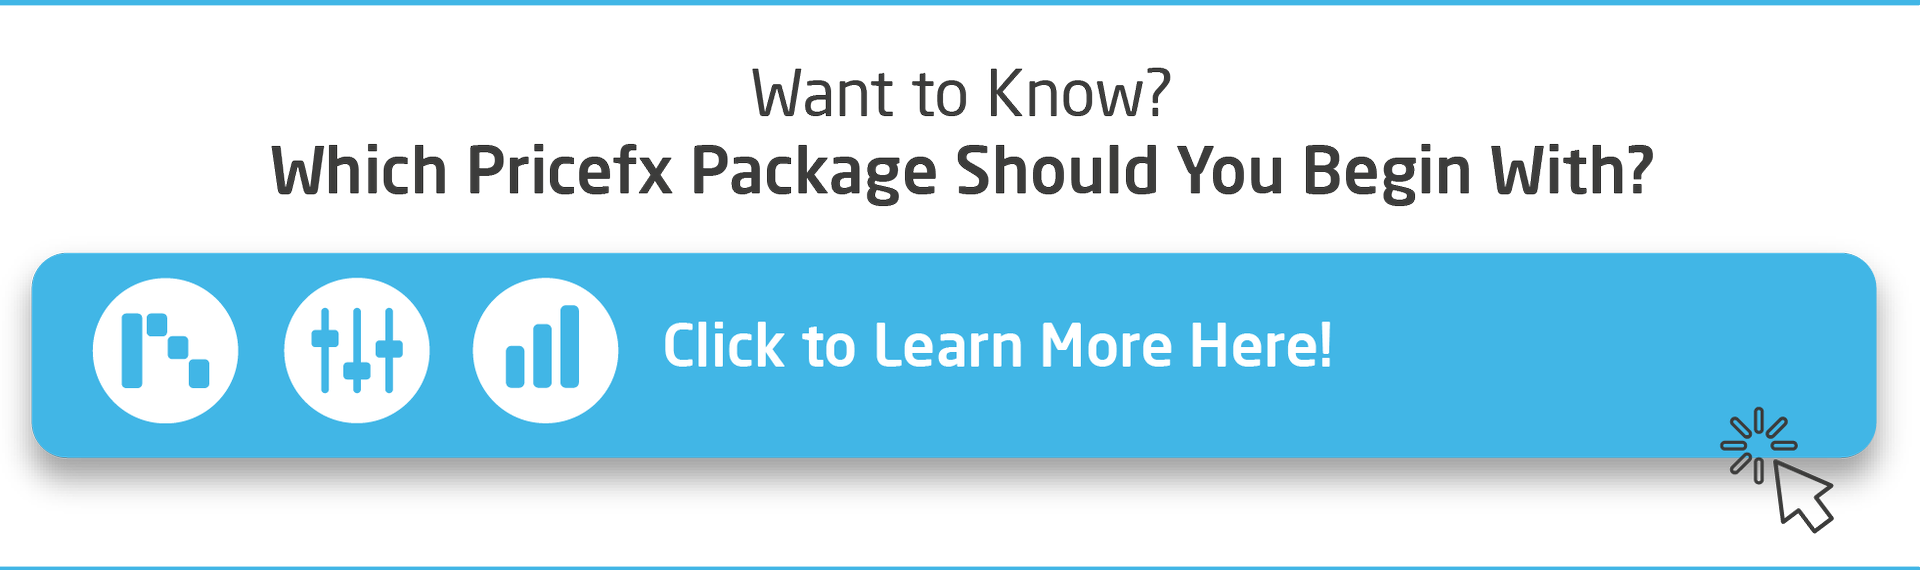 CTA-Which-Pricefx-Package-Should-You-Begin-With